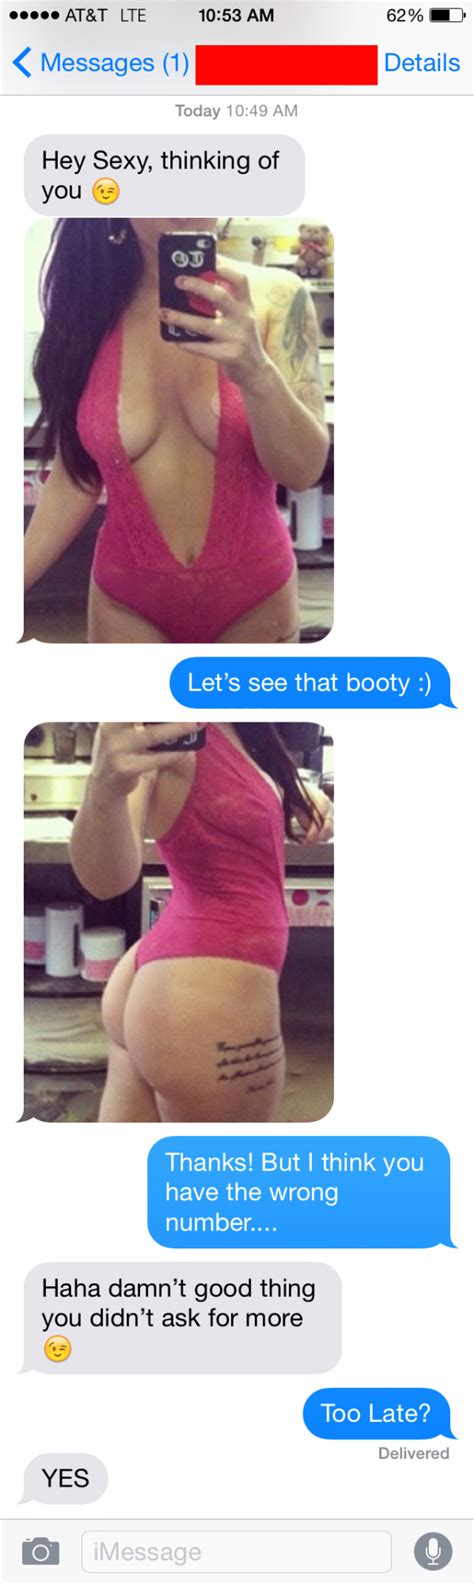 9 sexts sent to the wrong number pop culture gallery